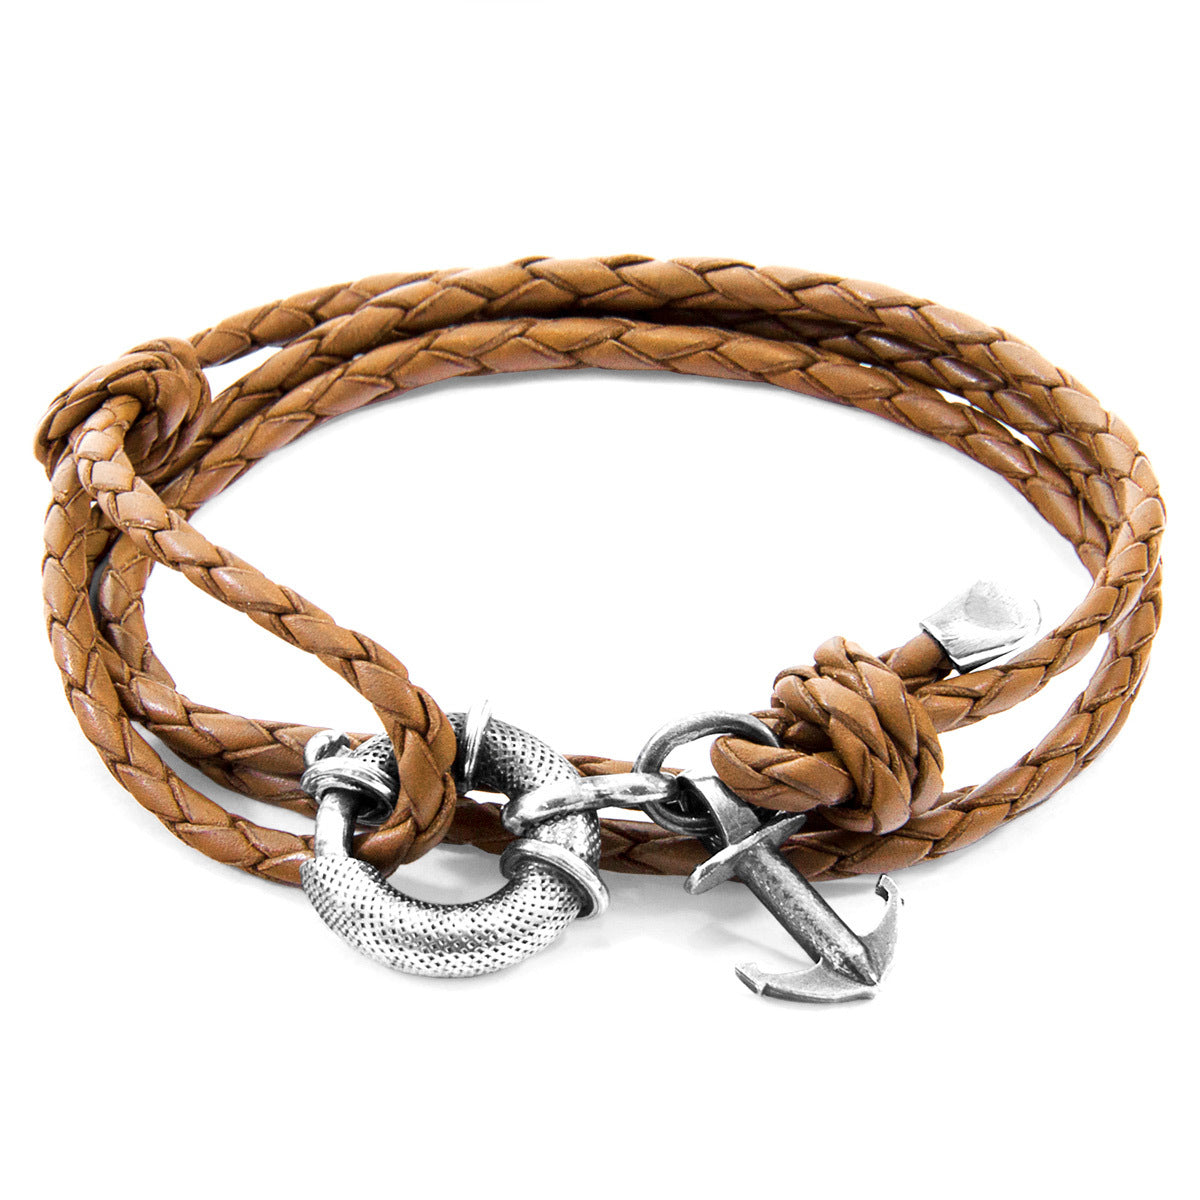 Light Brown Clyde Silver and Leather Bracelet - Handcrafted in Great Britain with Sterling Silver Clasp and Braided Leather. One Size Fits All. - Jewelry & Watches - Bijou Her -  -  - 